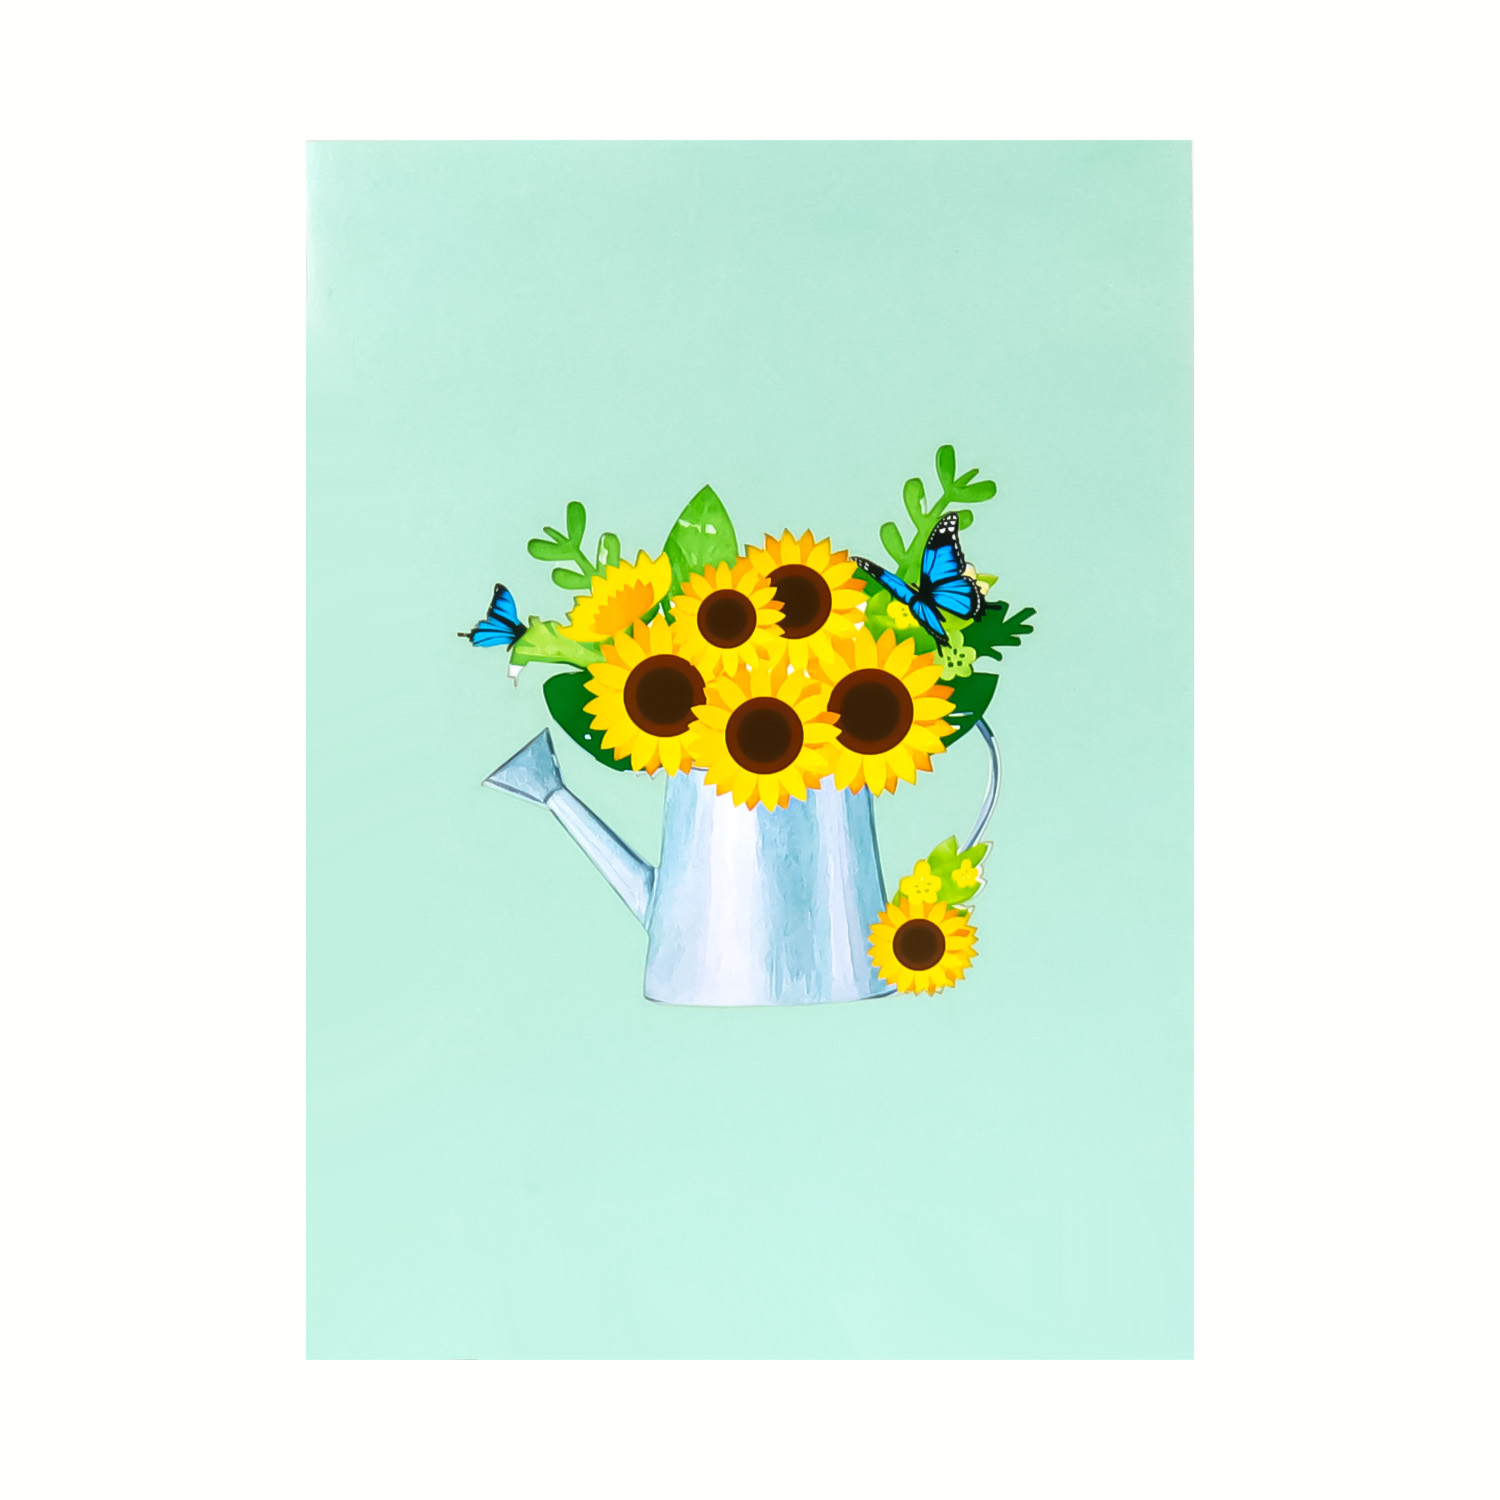 Watering-Can-Sunflower-Bouquet-Pop-Up-Card-cover-wholesale-manufacture-custom-design-custom-pop-up-birthday-card-just-because-pop-up-card-summer-pop-up-card